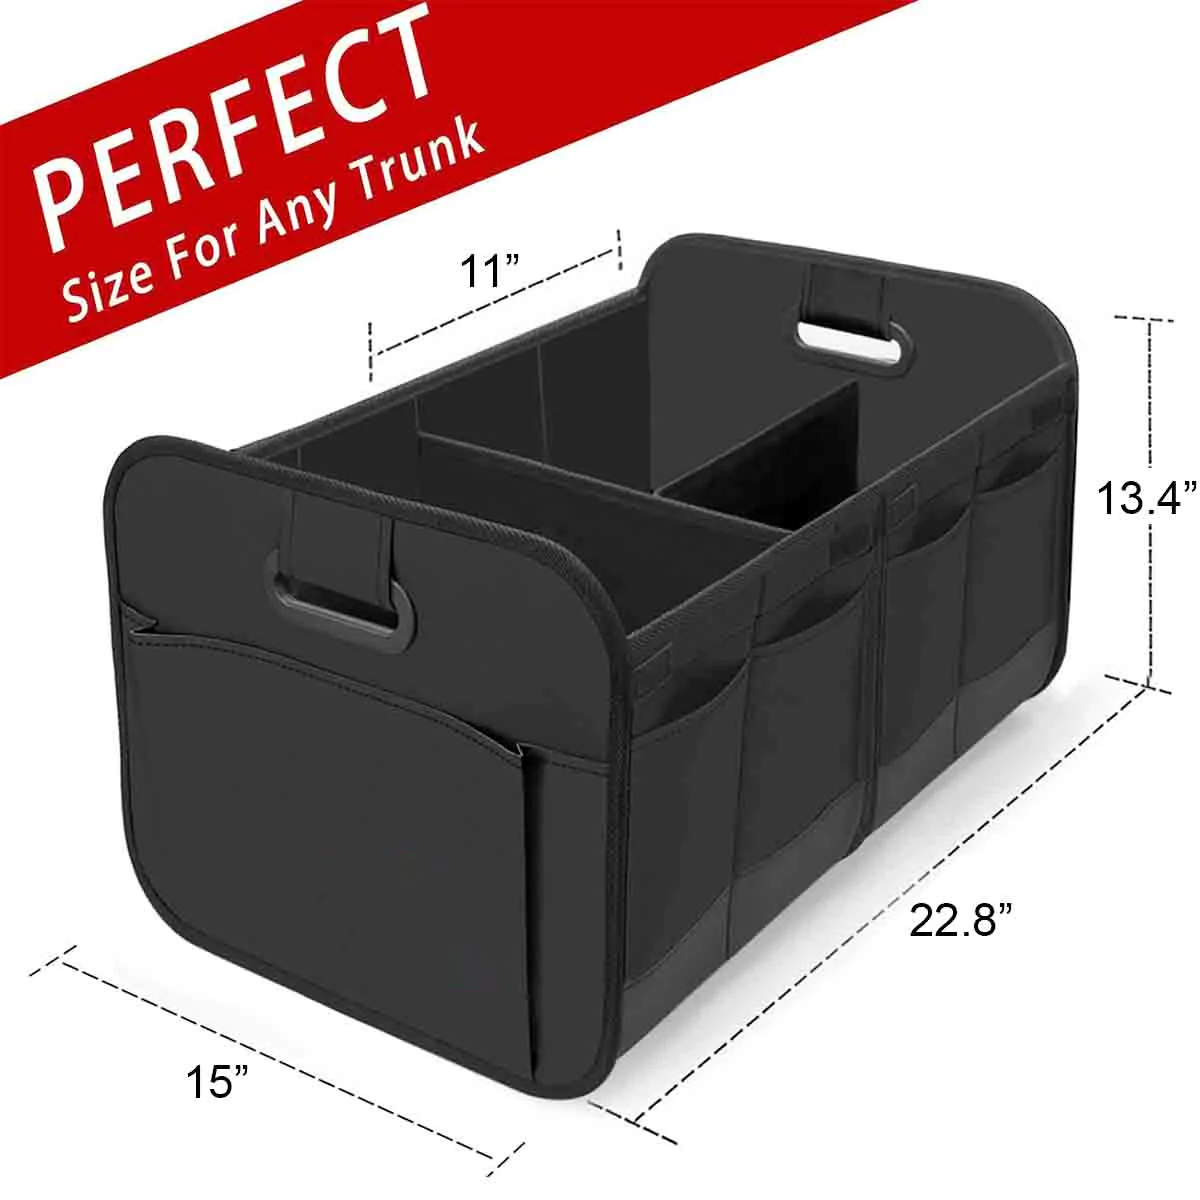 Custom Text For Car Trunk Organizer Storage, Custom Fit For Your Cars, Reinforced Handles, Collapsible Multi, Compartment Car Organizers, Foldable and Waterproof, 600D Oxford Polyester AC12995